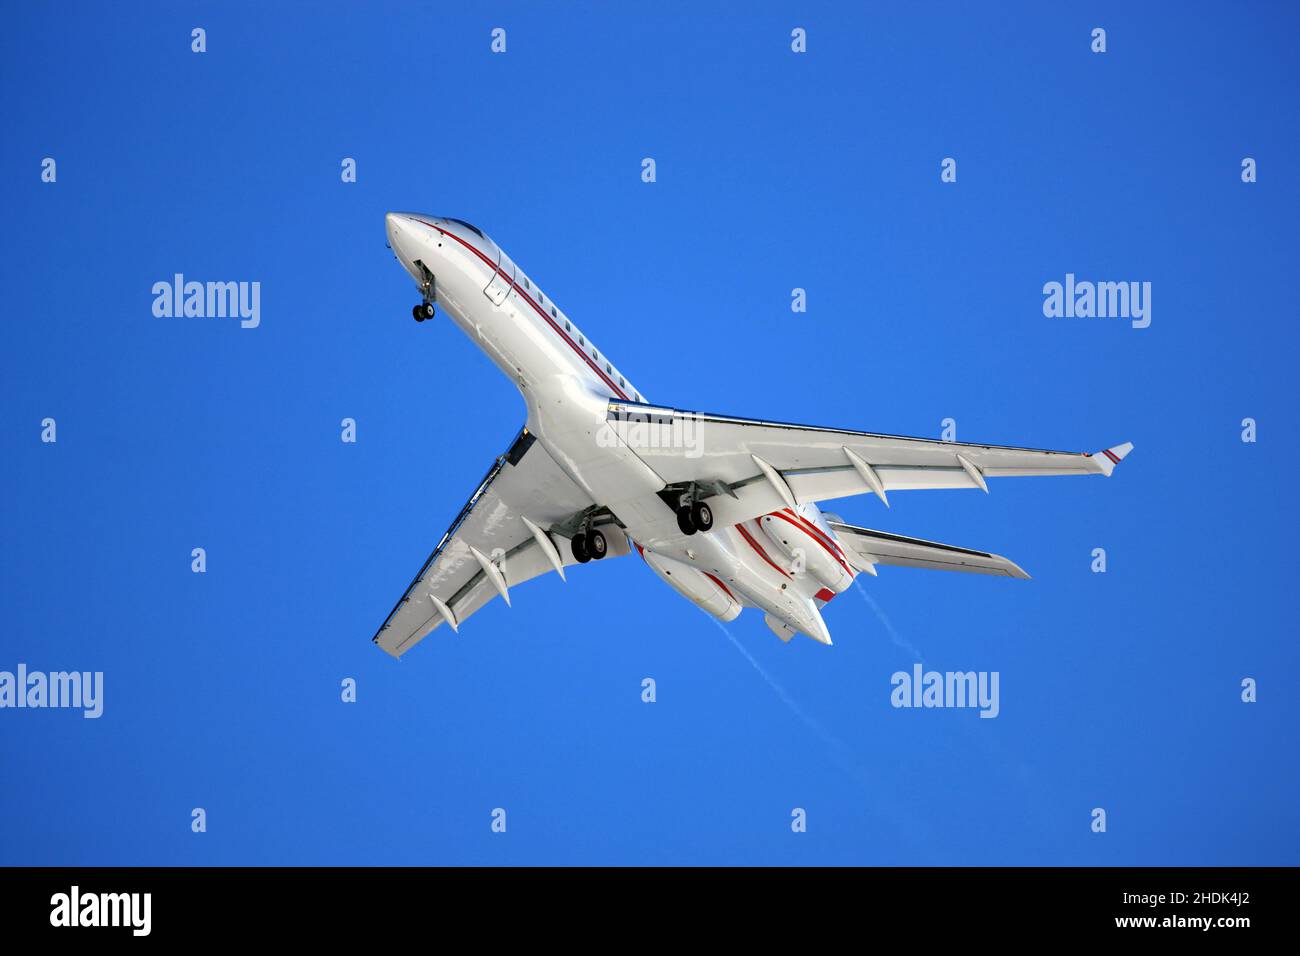 airplane, air traffic, landing, commercial airplane, airplanes, plane, planes, air traffics, commercial airplanes Stock Photo